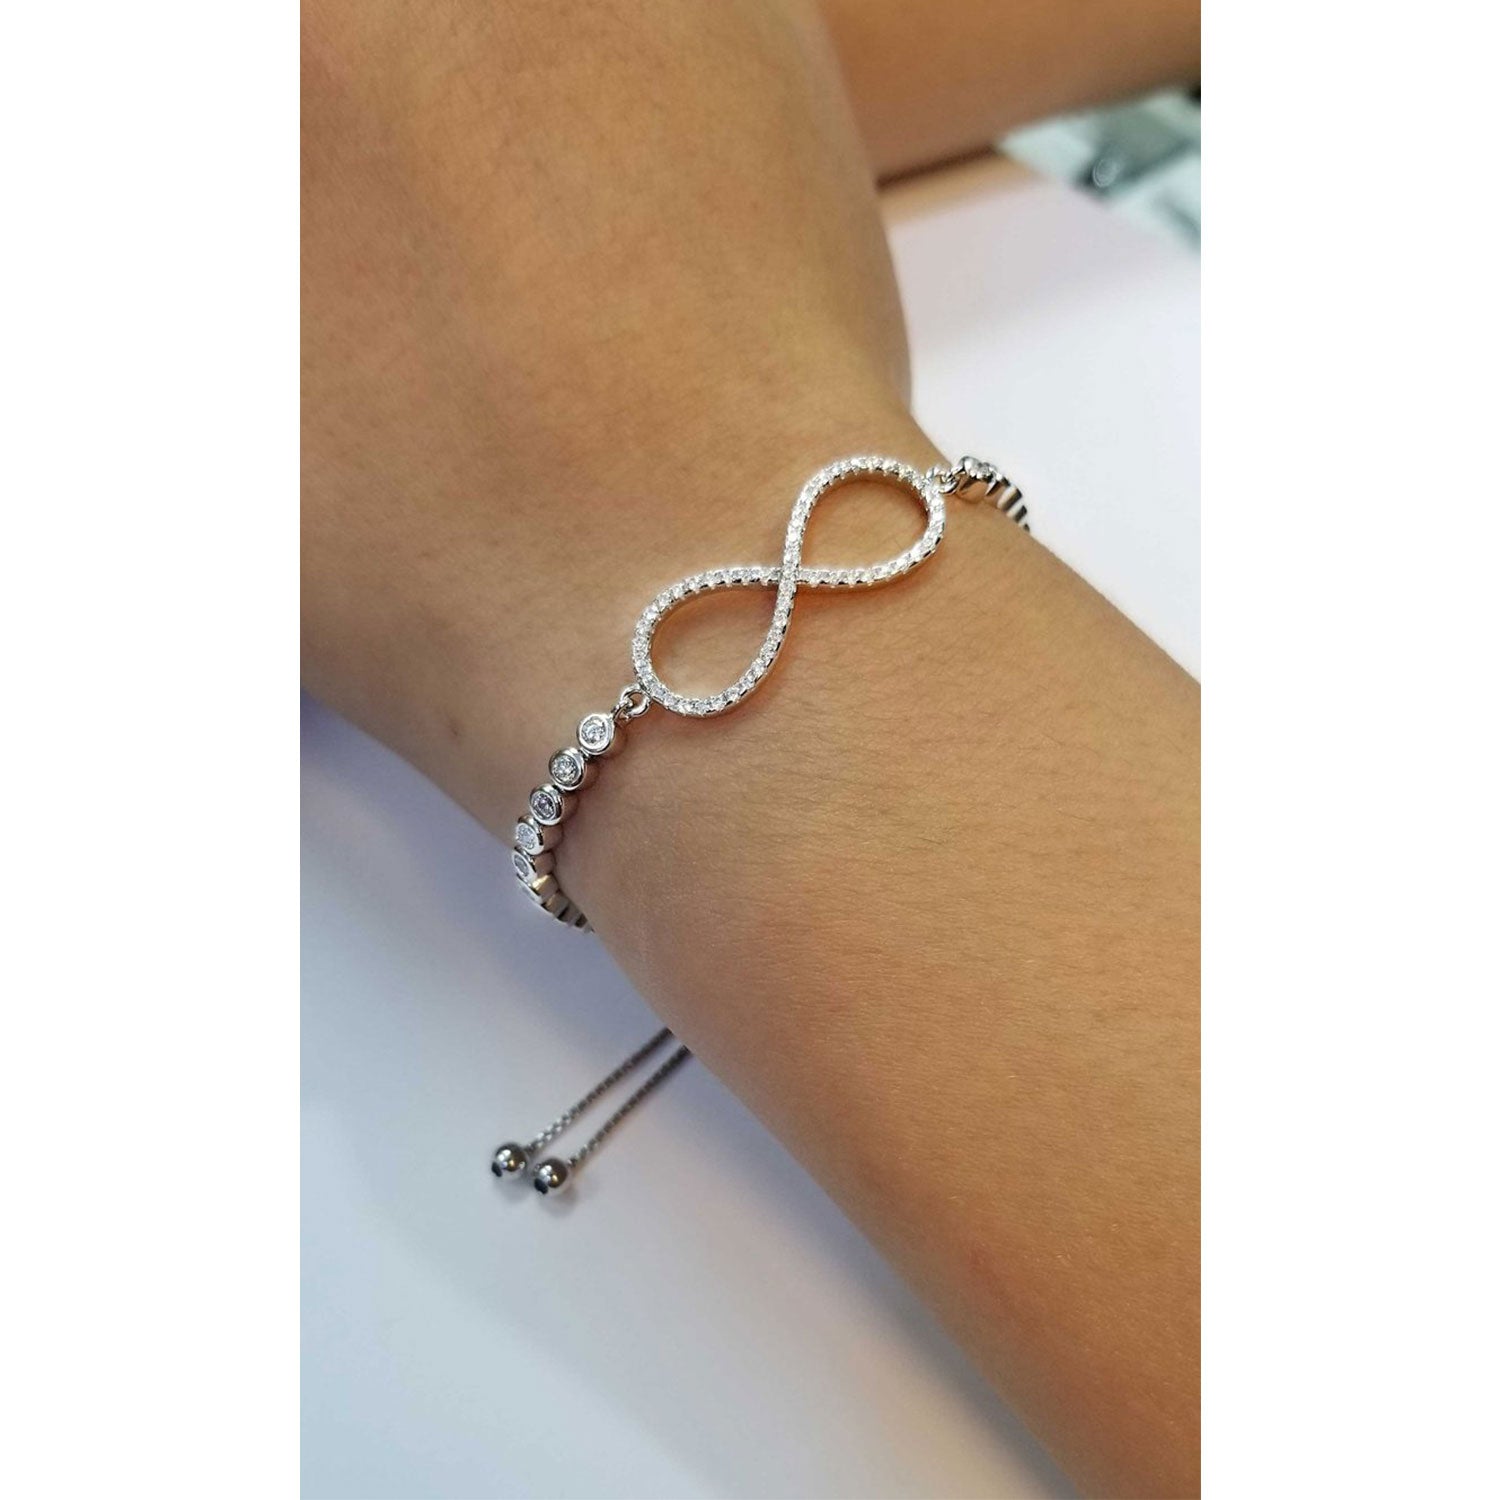 CZ Infinity Love Bracelet with Cubic Zirconia Stones in Sterling Silver